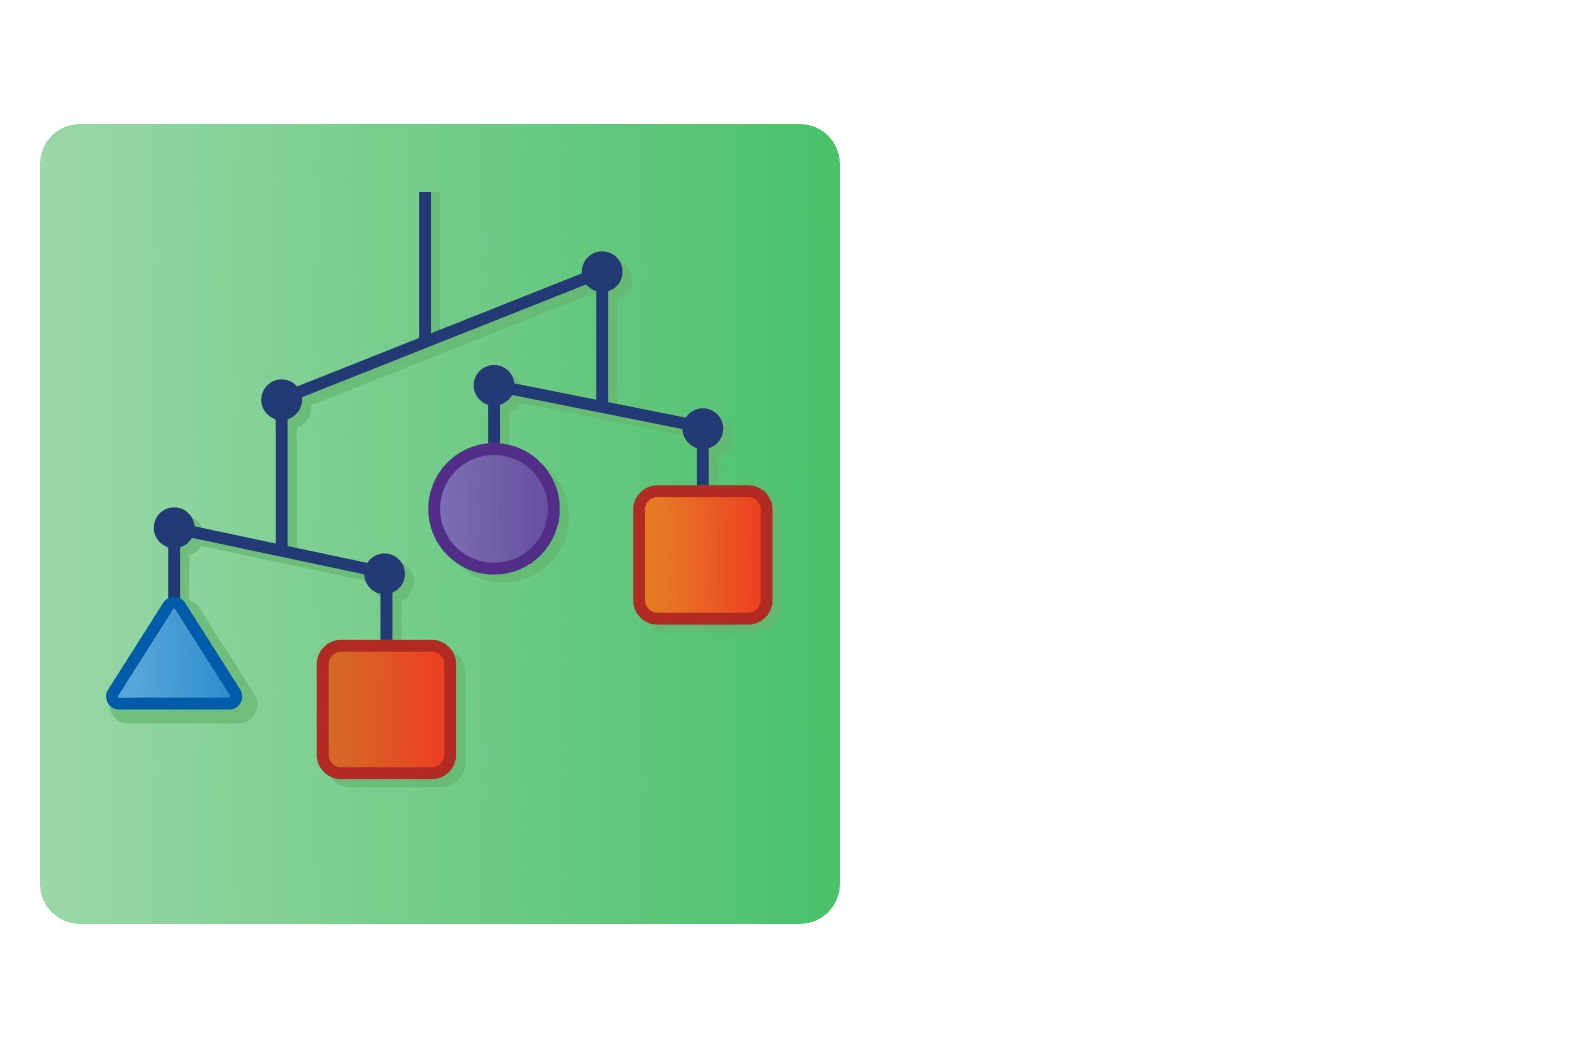 Abstract illustration of a hierarchical network diagram with geometric shapes: a circle, triangles, and squares in Blue, Green, and Orange.